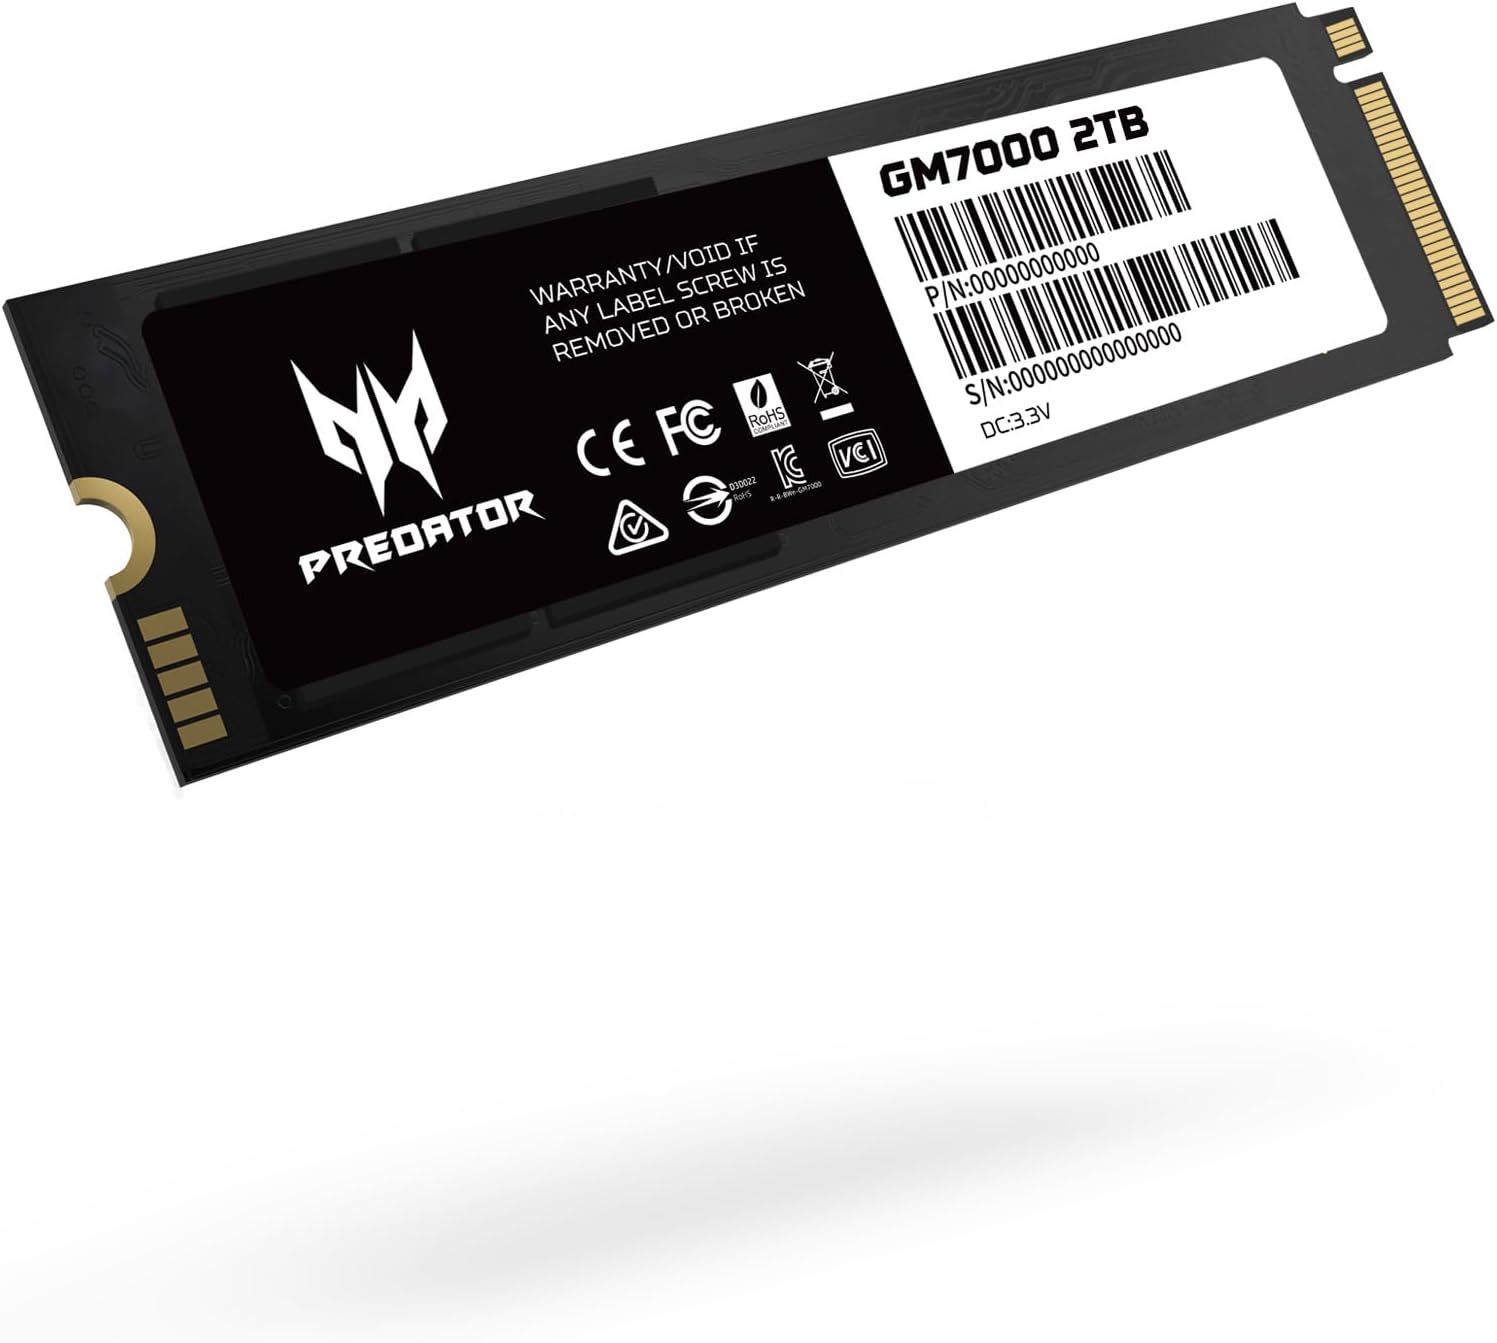 acer Predator GM7000 2TB NVMe Gen4 Gaming SSD, M.2 2280, Compatible with PS5, PCIe 4.0 Internal PC Solid State Hard Drive Up to 7400MB/s - BL.9BWWR.106